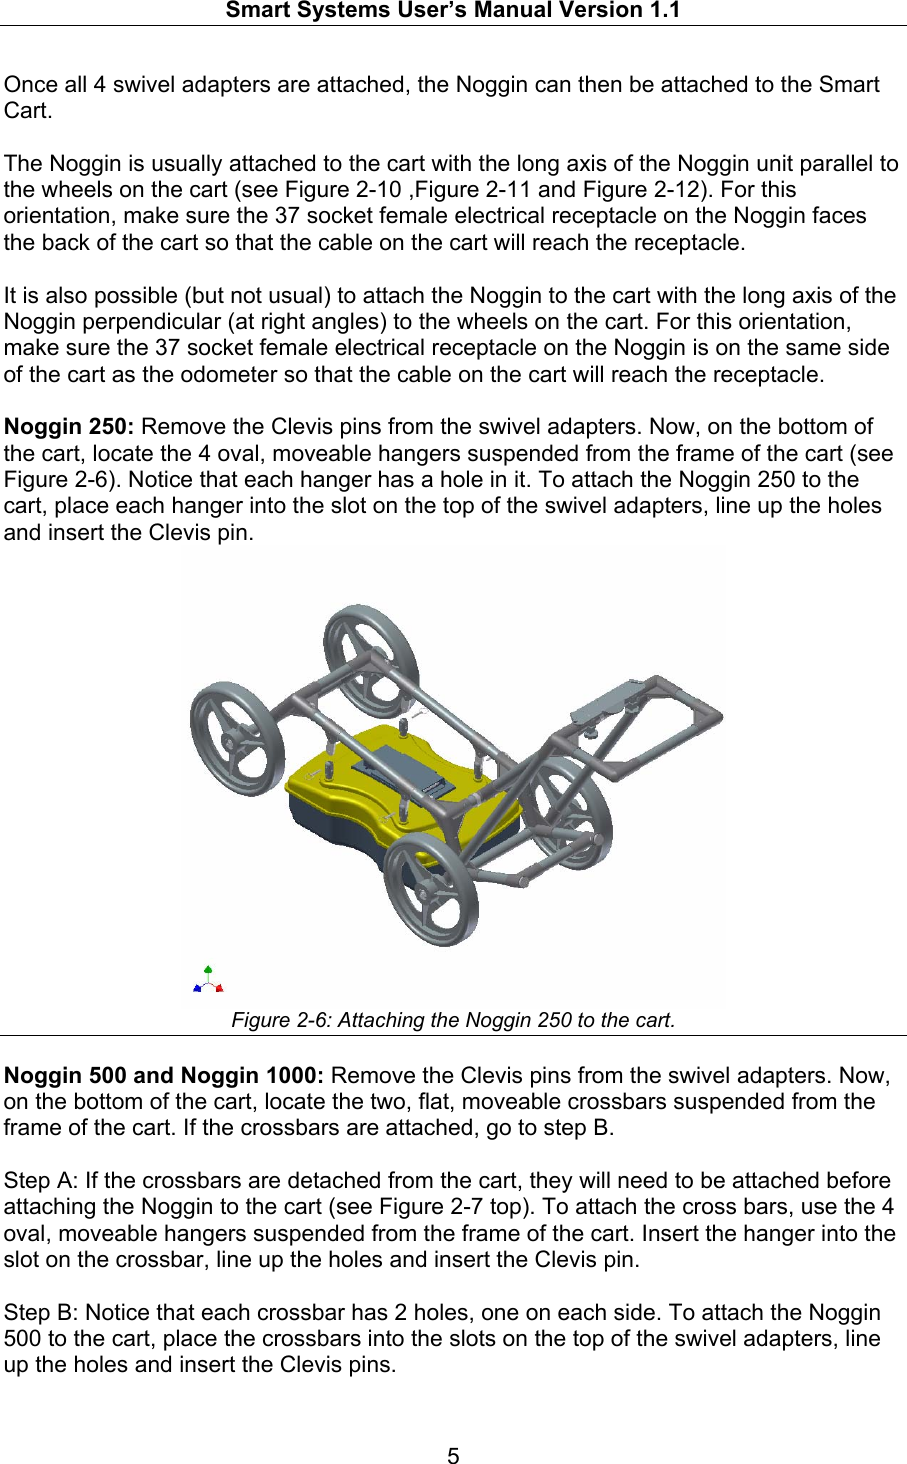   Smart Systems User’s Manual Version 1.1  5  Once all 4 swivel adapters are attached, the Noggin can then be attached to the Smart Cart.   The Noggin is usually attached to the cart with the long axis of the Noggin unit parallel to the wheels on the cart (see Figure 2-10 ,Figure 2-11 and Figure 2-12). For this orientation, make sure the 37 socket female electrical receptacle on the Noggin faces the back of the cart so that the cable on the cart will reach the receptacle.  It is also possible (but not usual) to attach the Noggin to the cart with the long axis of the Noggin perpendicular (at right angles) to the wheels on the cart. For this orientation, make sure the 37 socket female electrical receptacle on the Noggin is on the same side of the cart as the odometer so that the cable on the cart will reach the receptacle.  Noggin 250: Remove the Clevis pins from the swivel adapters. Now, on the bottom of the cart, locate the 4 oval, moveable hangers suspended from the frame of the cart (see Figure 2-6). Notice that each hanger has a hole in it. To attach the Noggin 250 to the cart, place each hanger into the slot on the top of the swivel adapters, line up the holes and insert the Clevis pin.   Figure 2-6: Attaching the Noggin 250 to the cart.  Noggin 500 and Noggin 1000: Remove the Clevis pins from the swivel adapters. Now, on the bottom of the cart, locate the two, flat, moveable crossbars suspended from the frame of the cart. If the crossbars are attached, go to step B.  Step A: If the crossbars are detached from the cart, they will need to be attached before attaching the Noggin to the cart (see Figure 2-7 top). To attach the cross bars, use the 4 oval, moveable hangers suspended from the frame of the cart. Insert the hanger into the slot on the crossbar, line up the holes and insert the Clevis pin.    Step B: Notice that each crossbar has 2 holes, one on each side. To attach the Noggin 500 to the cart, place the crossbars into the slots on the top of the swivel adapters, line up the holes and insert the Clevis pins.  